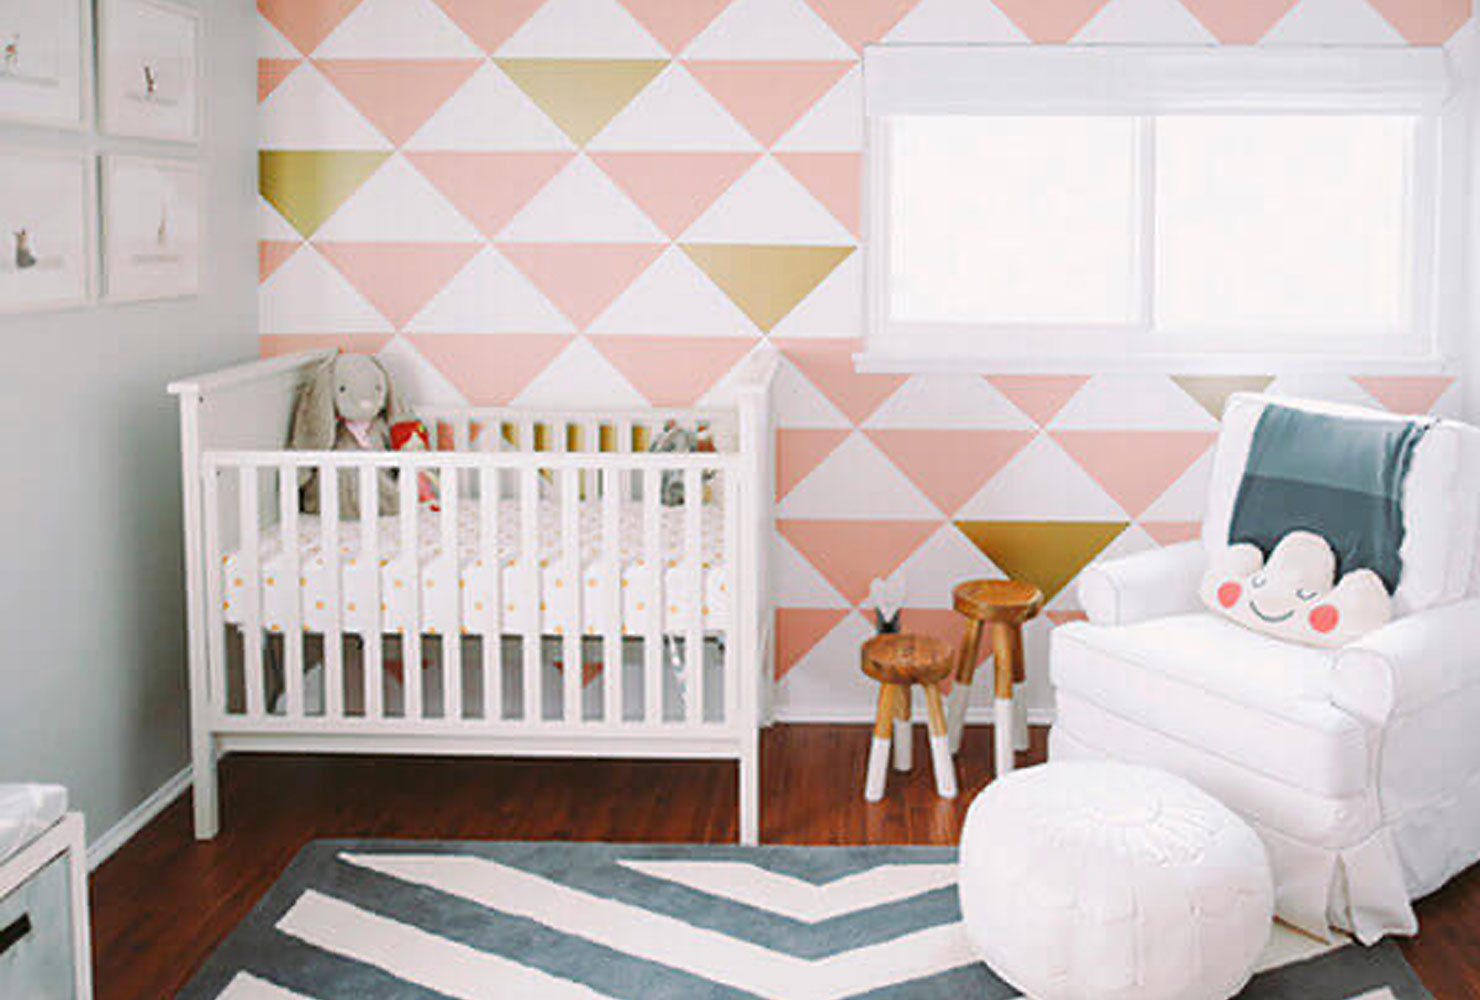 Pink and gold chevron wall in baby nursery.